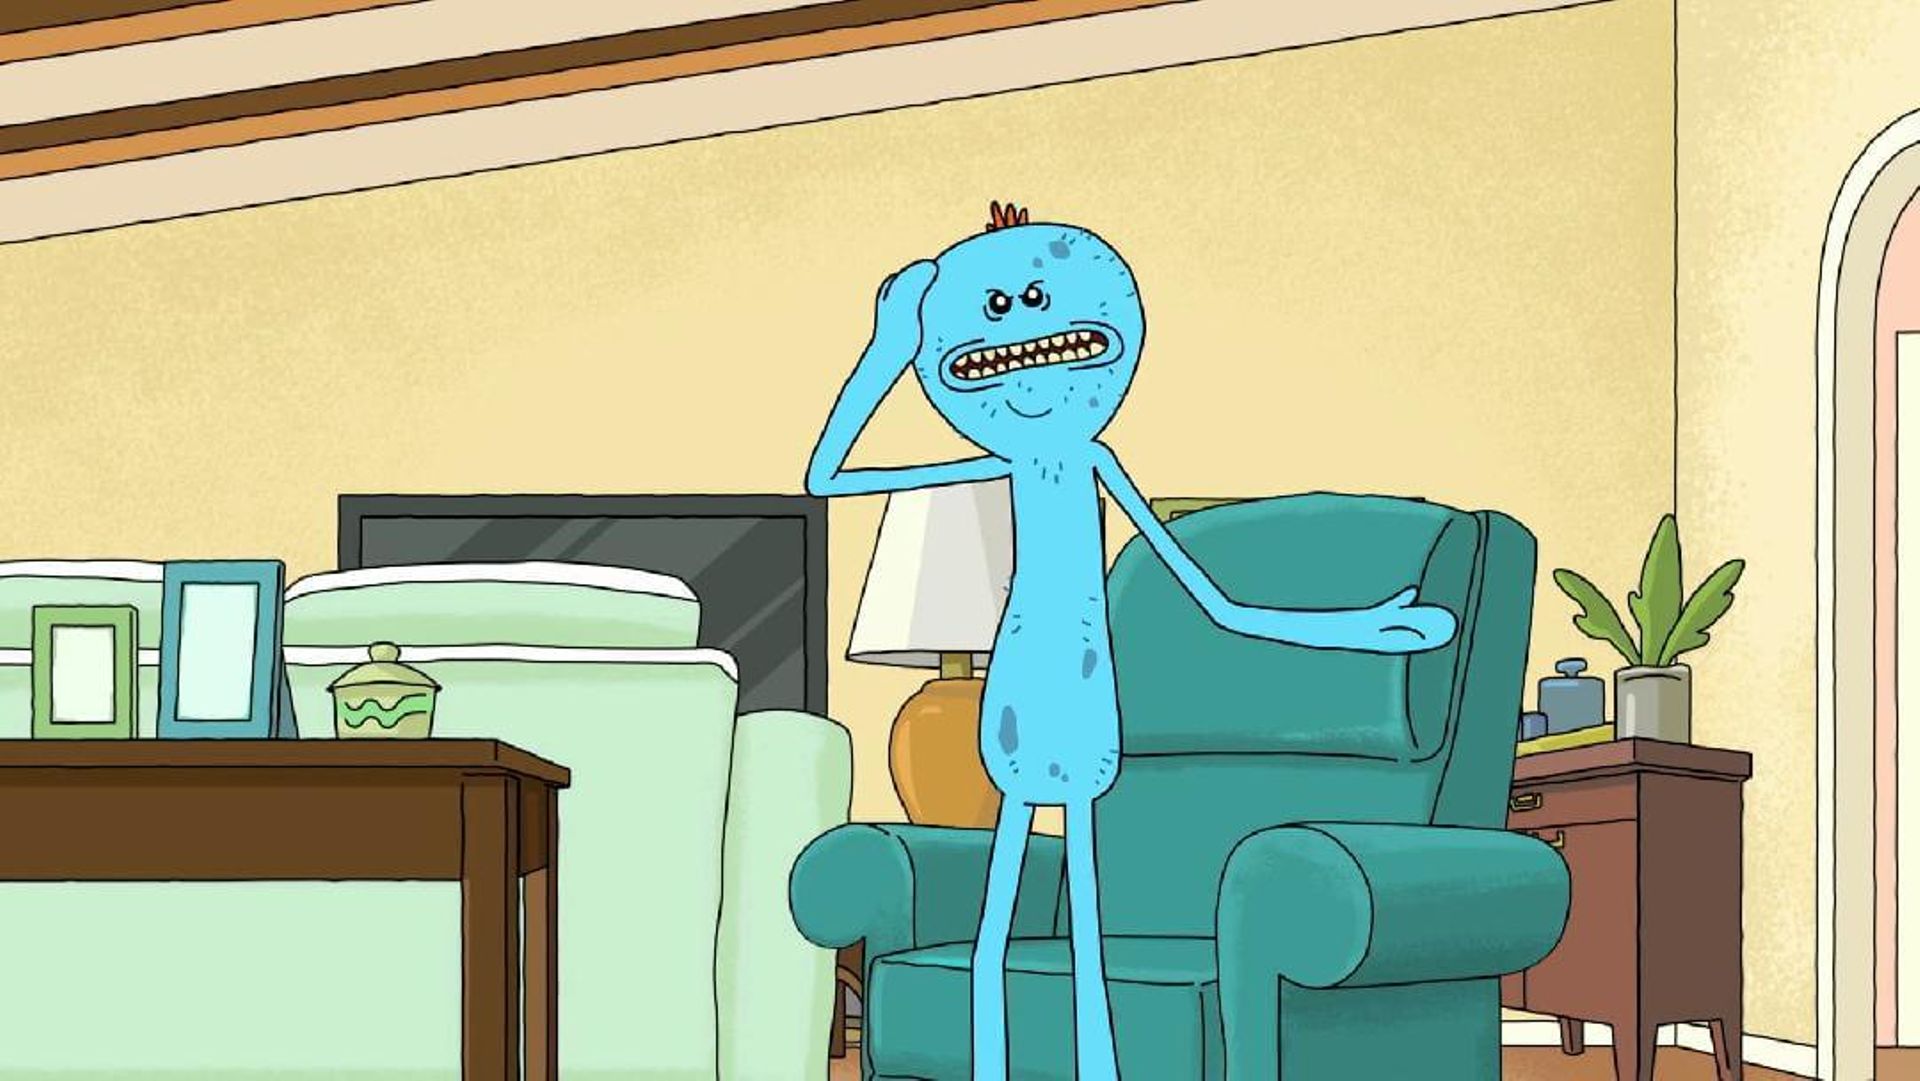 The Mr. Meeseeks turn on each other - S1 EP5 - Rick and Morty.